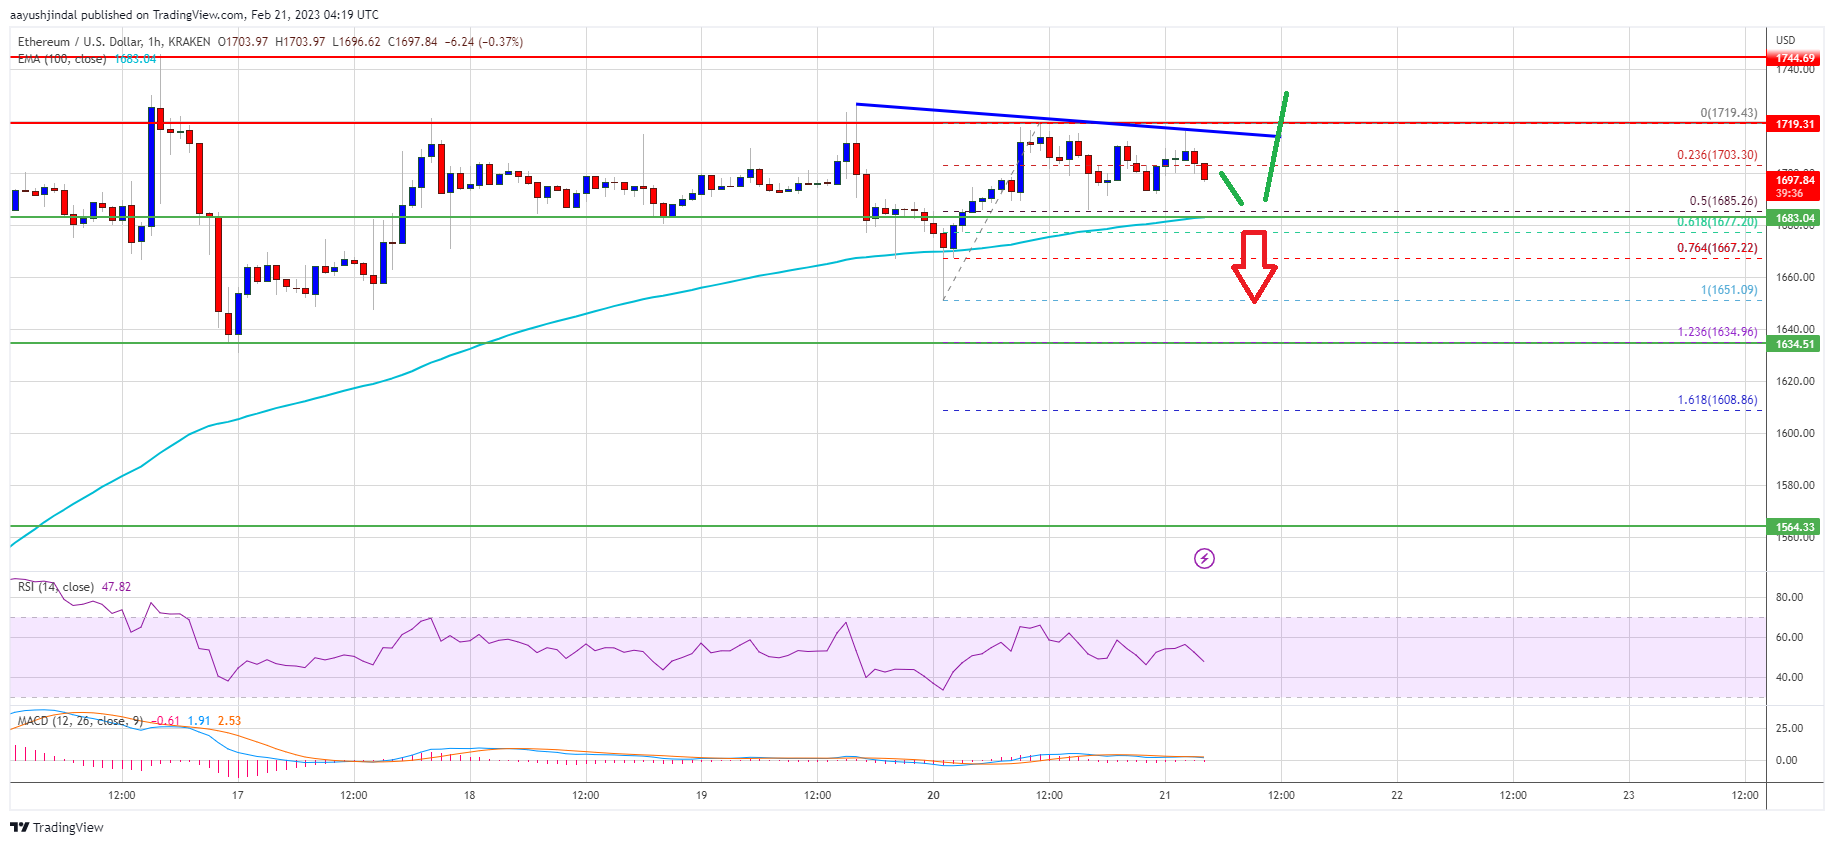 Ethereum Price Breaking This Confluence Resistance Could Spark Significant Surge